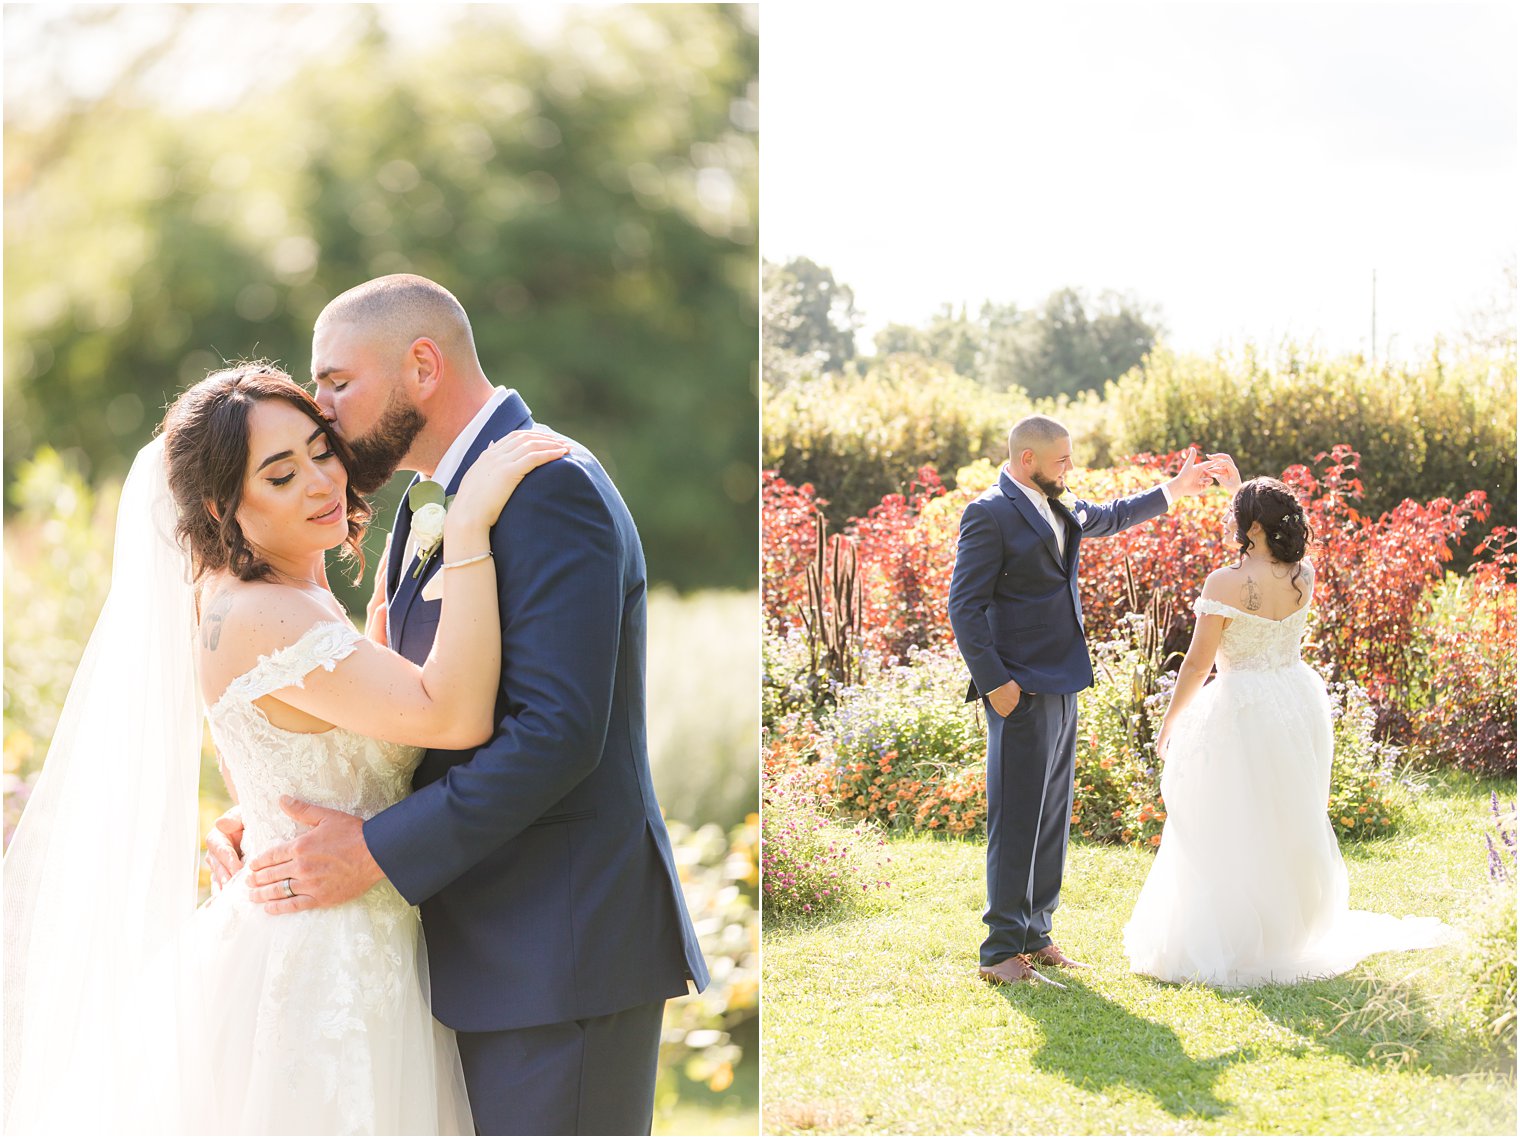 New Jersey couple dances in Rutgers Gardens during wedding portraits 